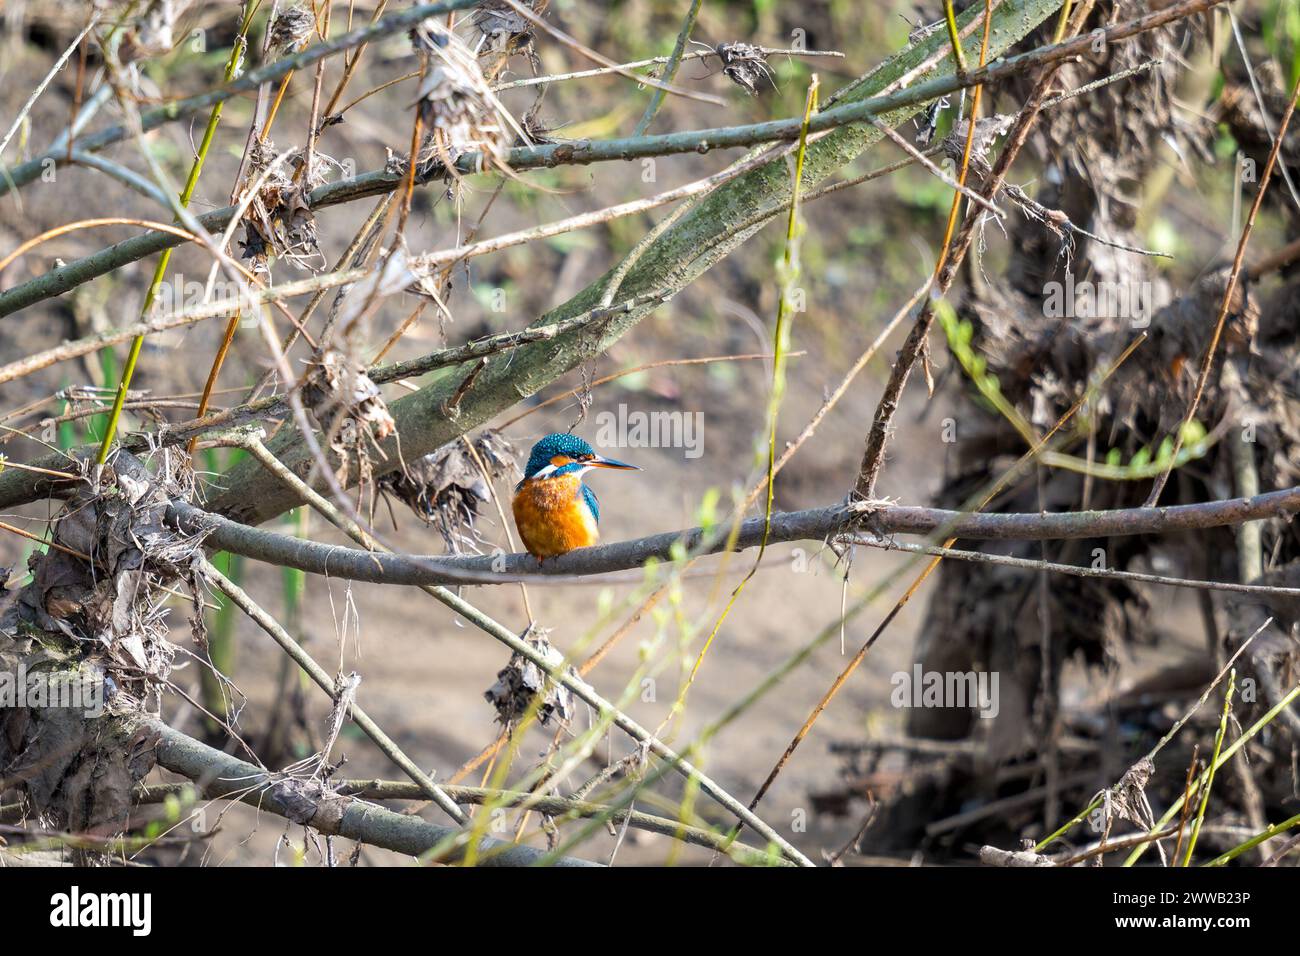 Common Kingfisher, Alcedo atthis, sat on a tree branch surrounded by brambles Stock Photo